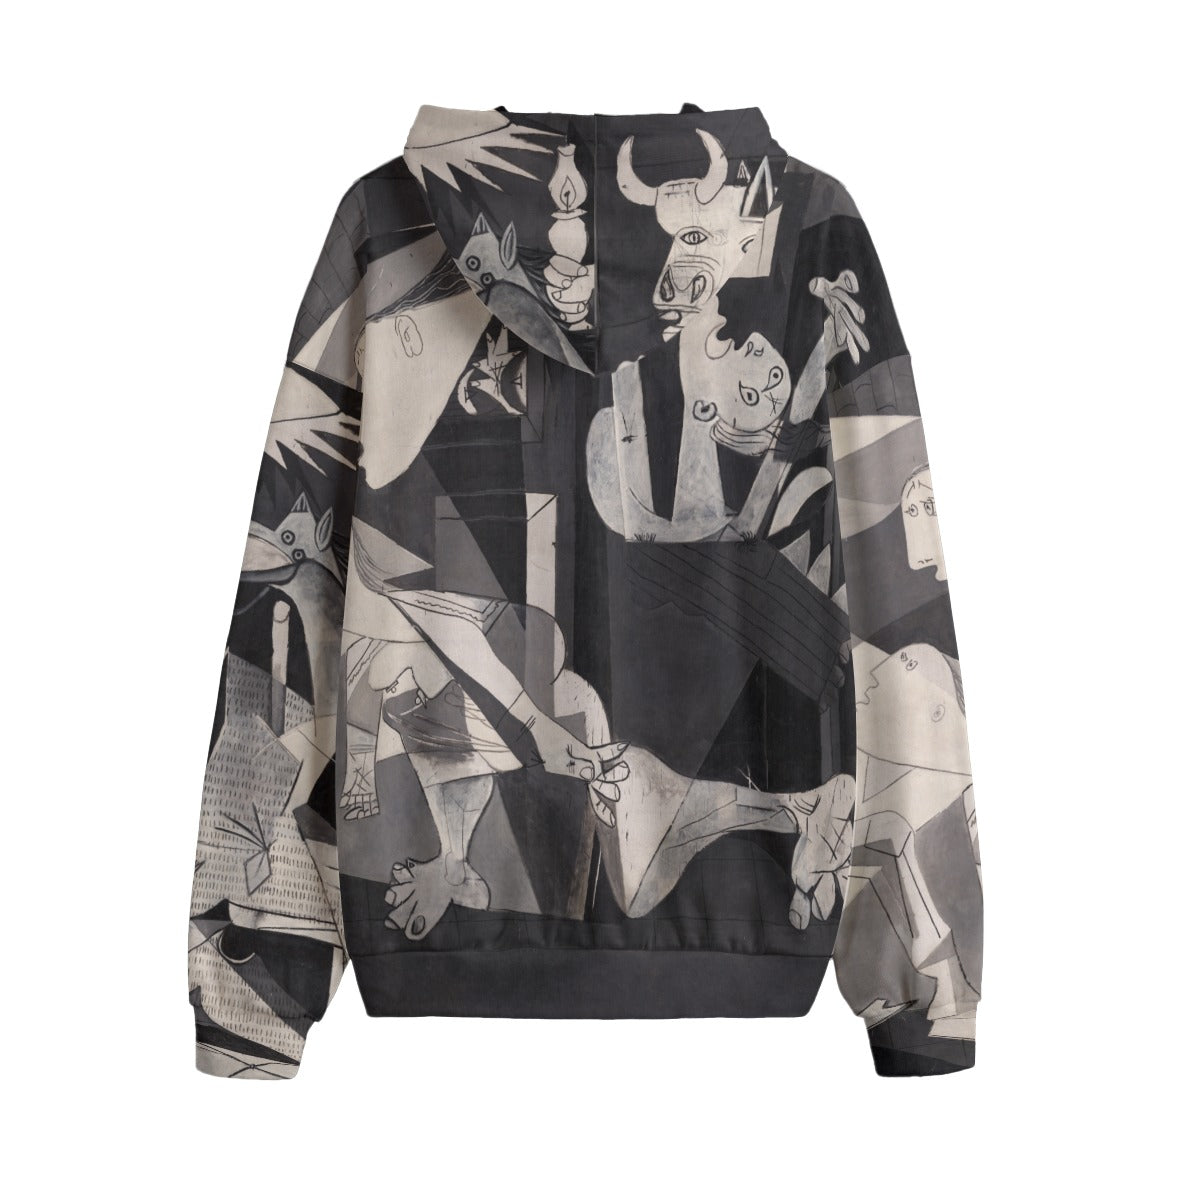 Wearable Art Inspired by Guernica